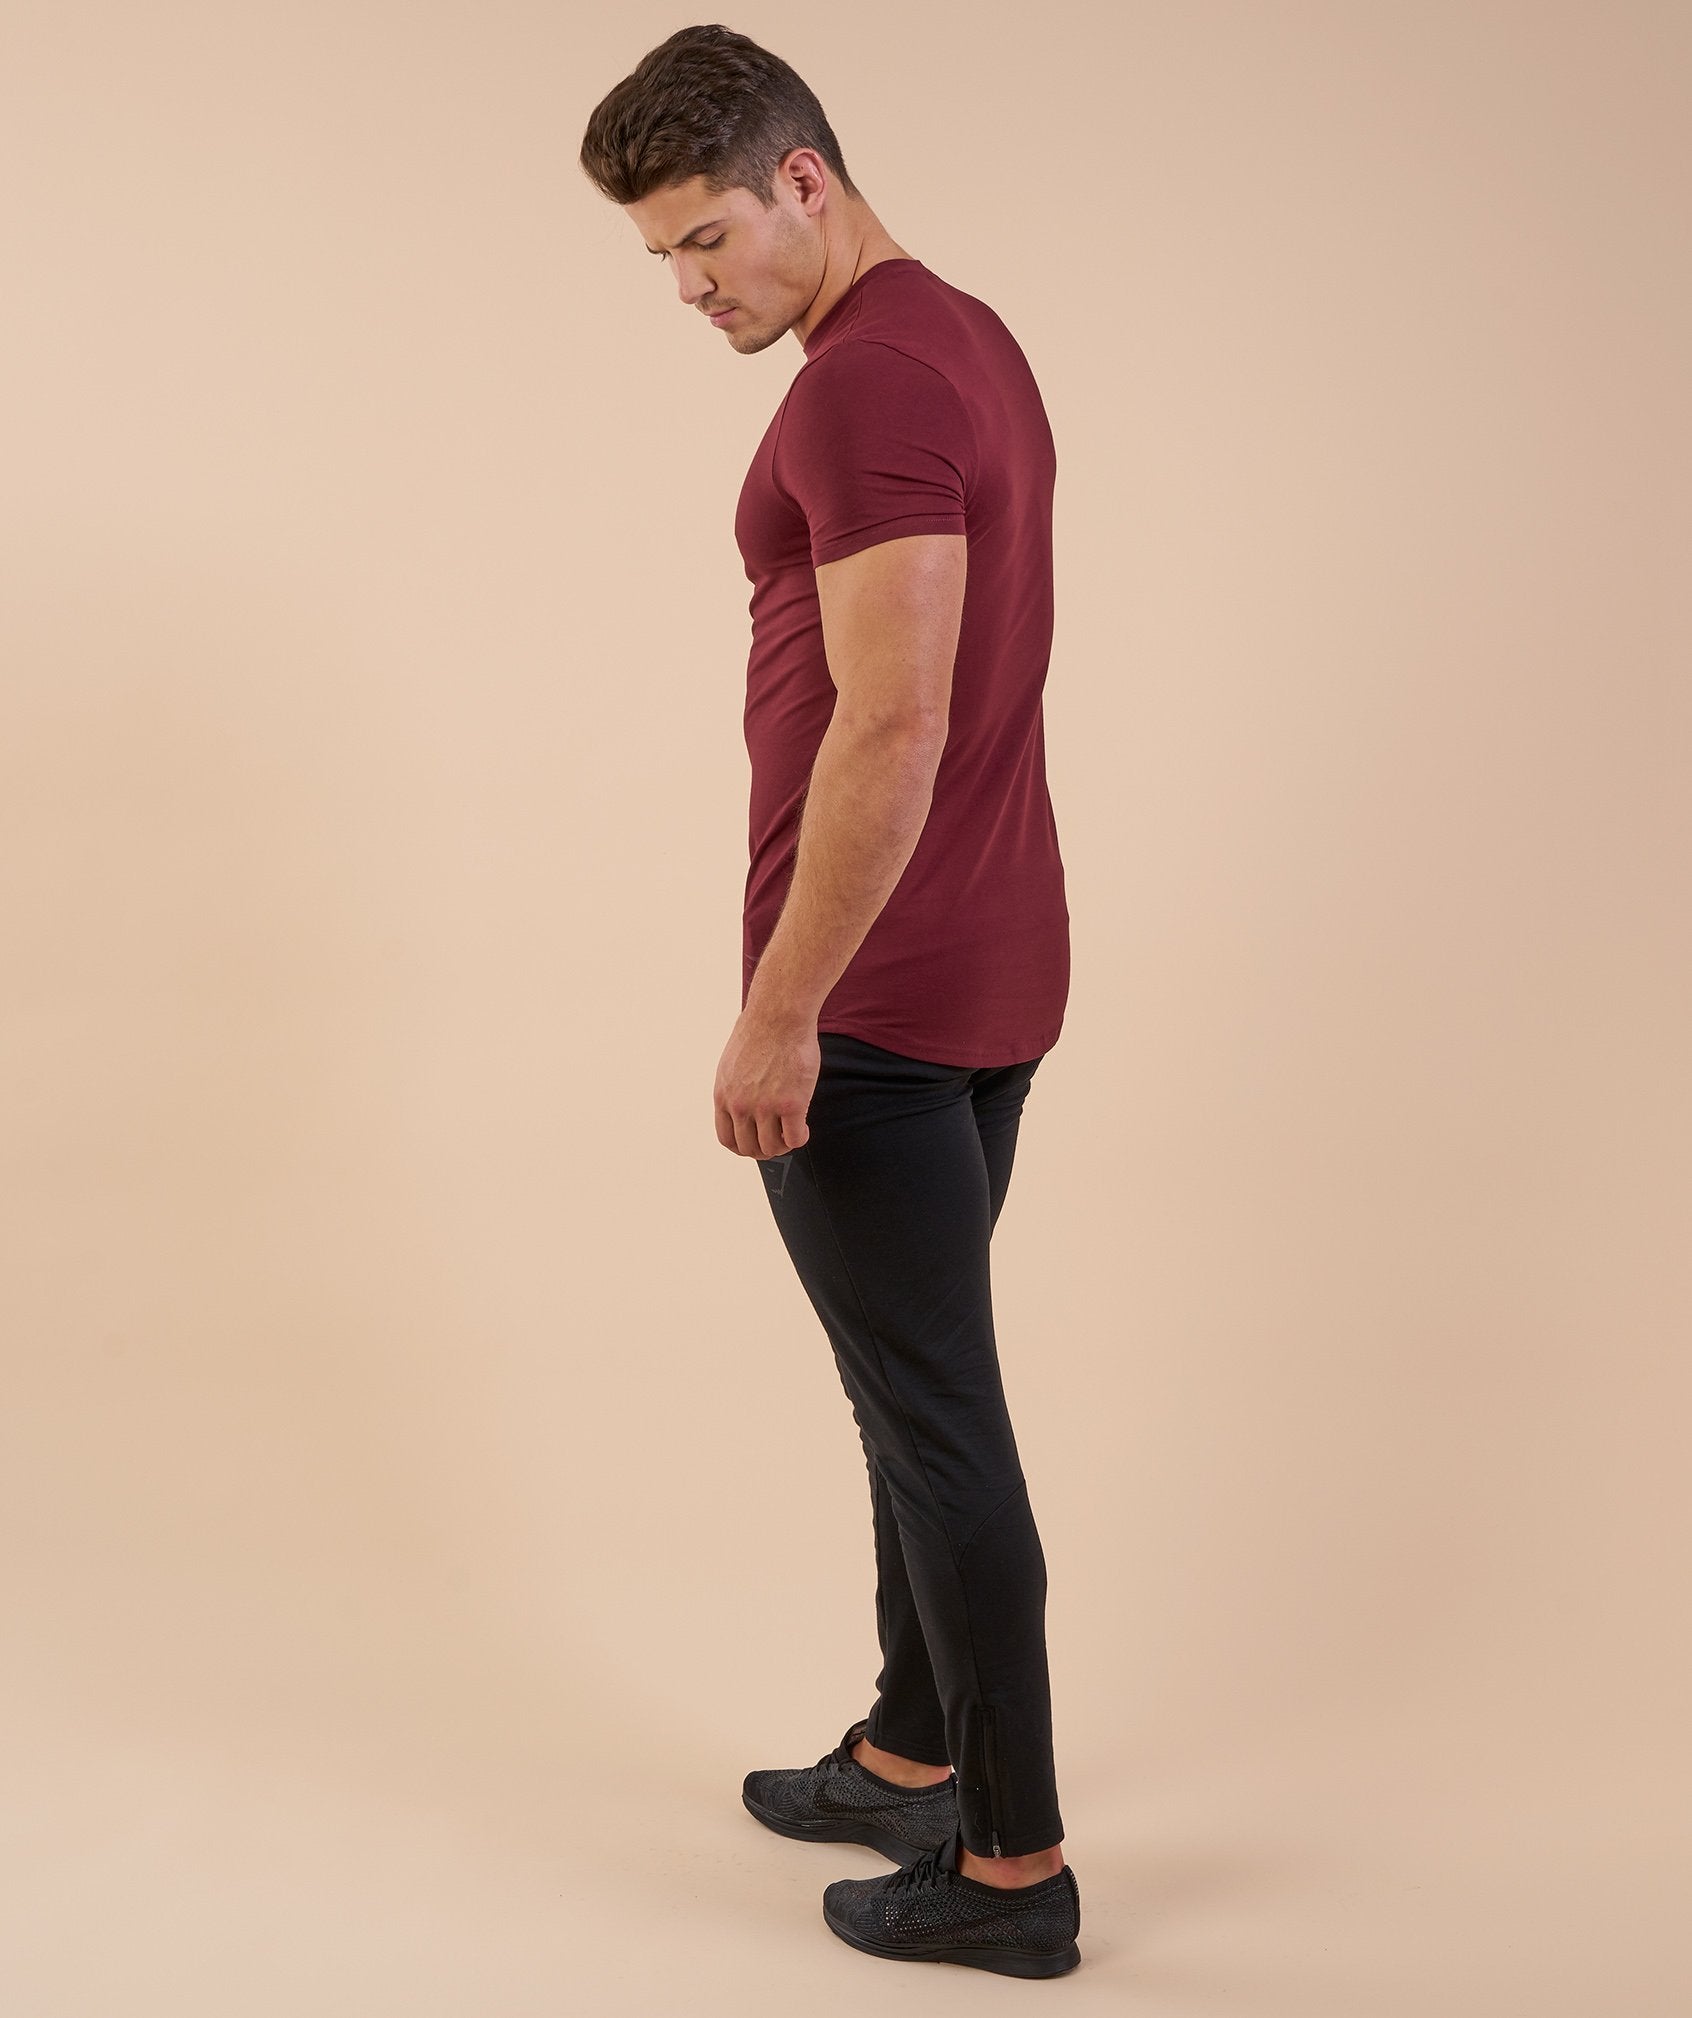 Solace Longline T-Shirt in Port - view 5